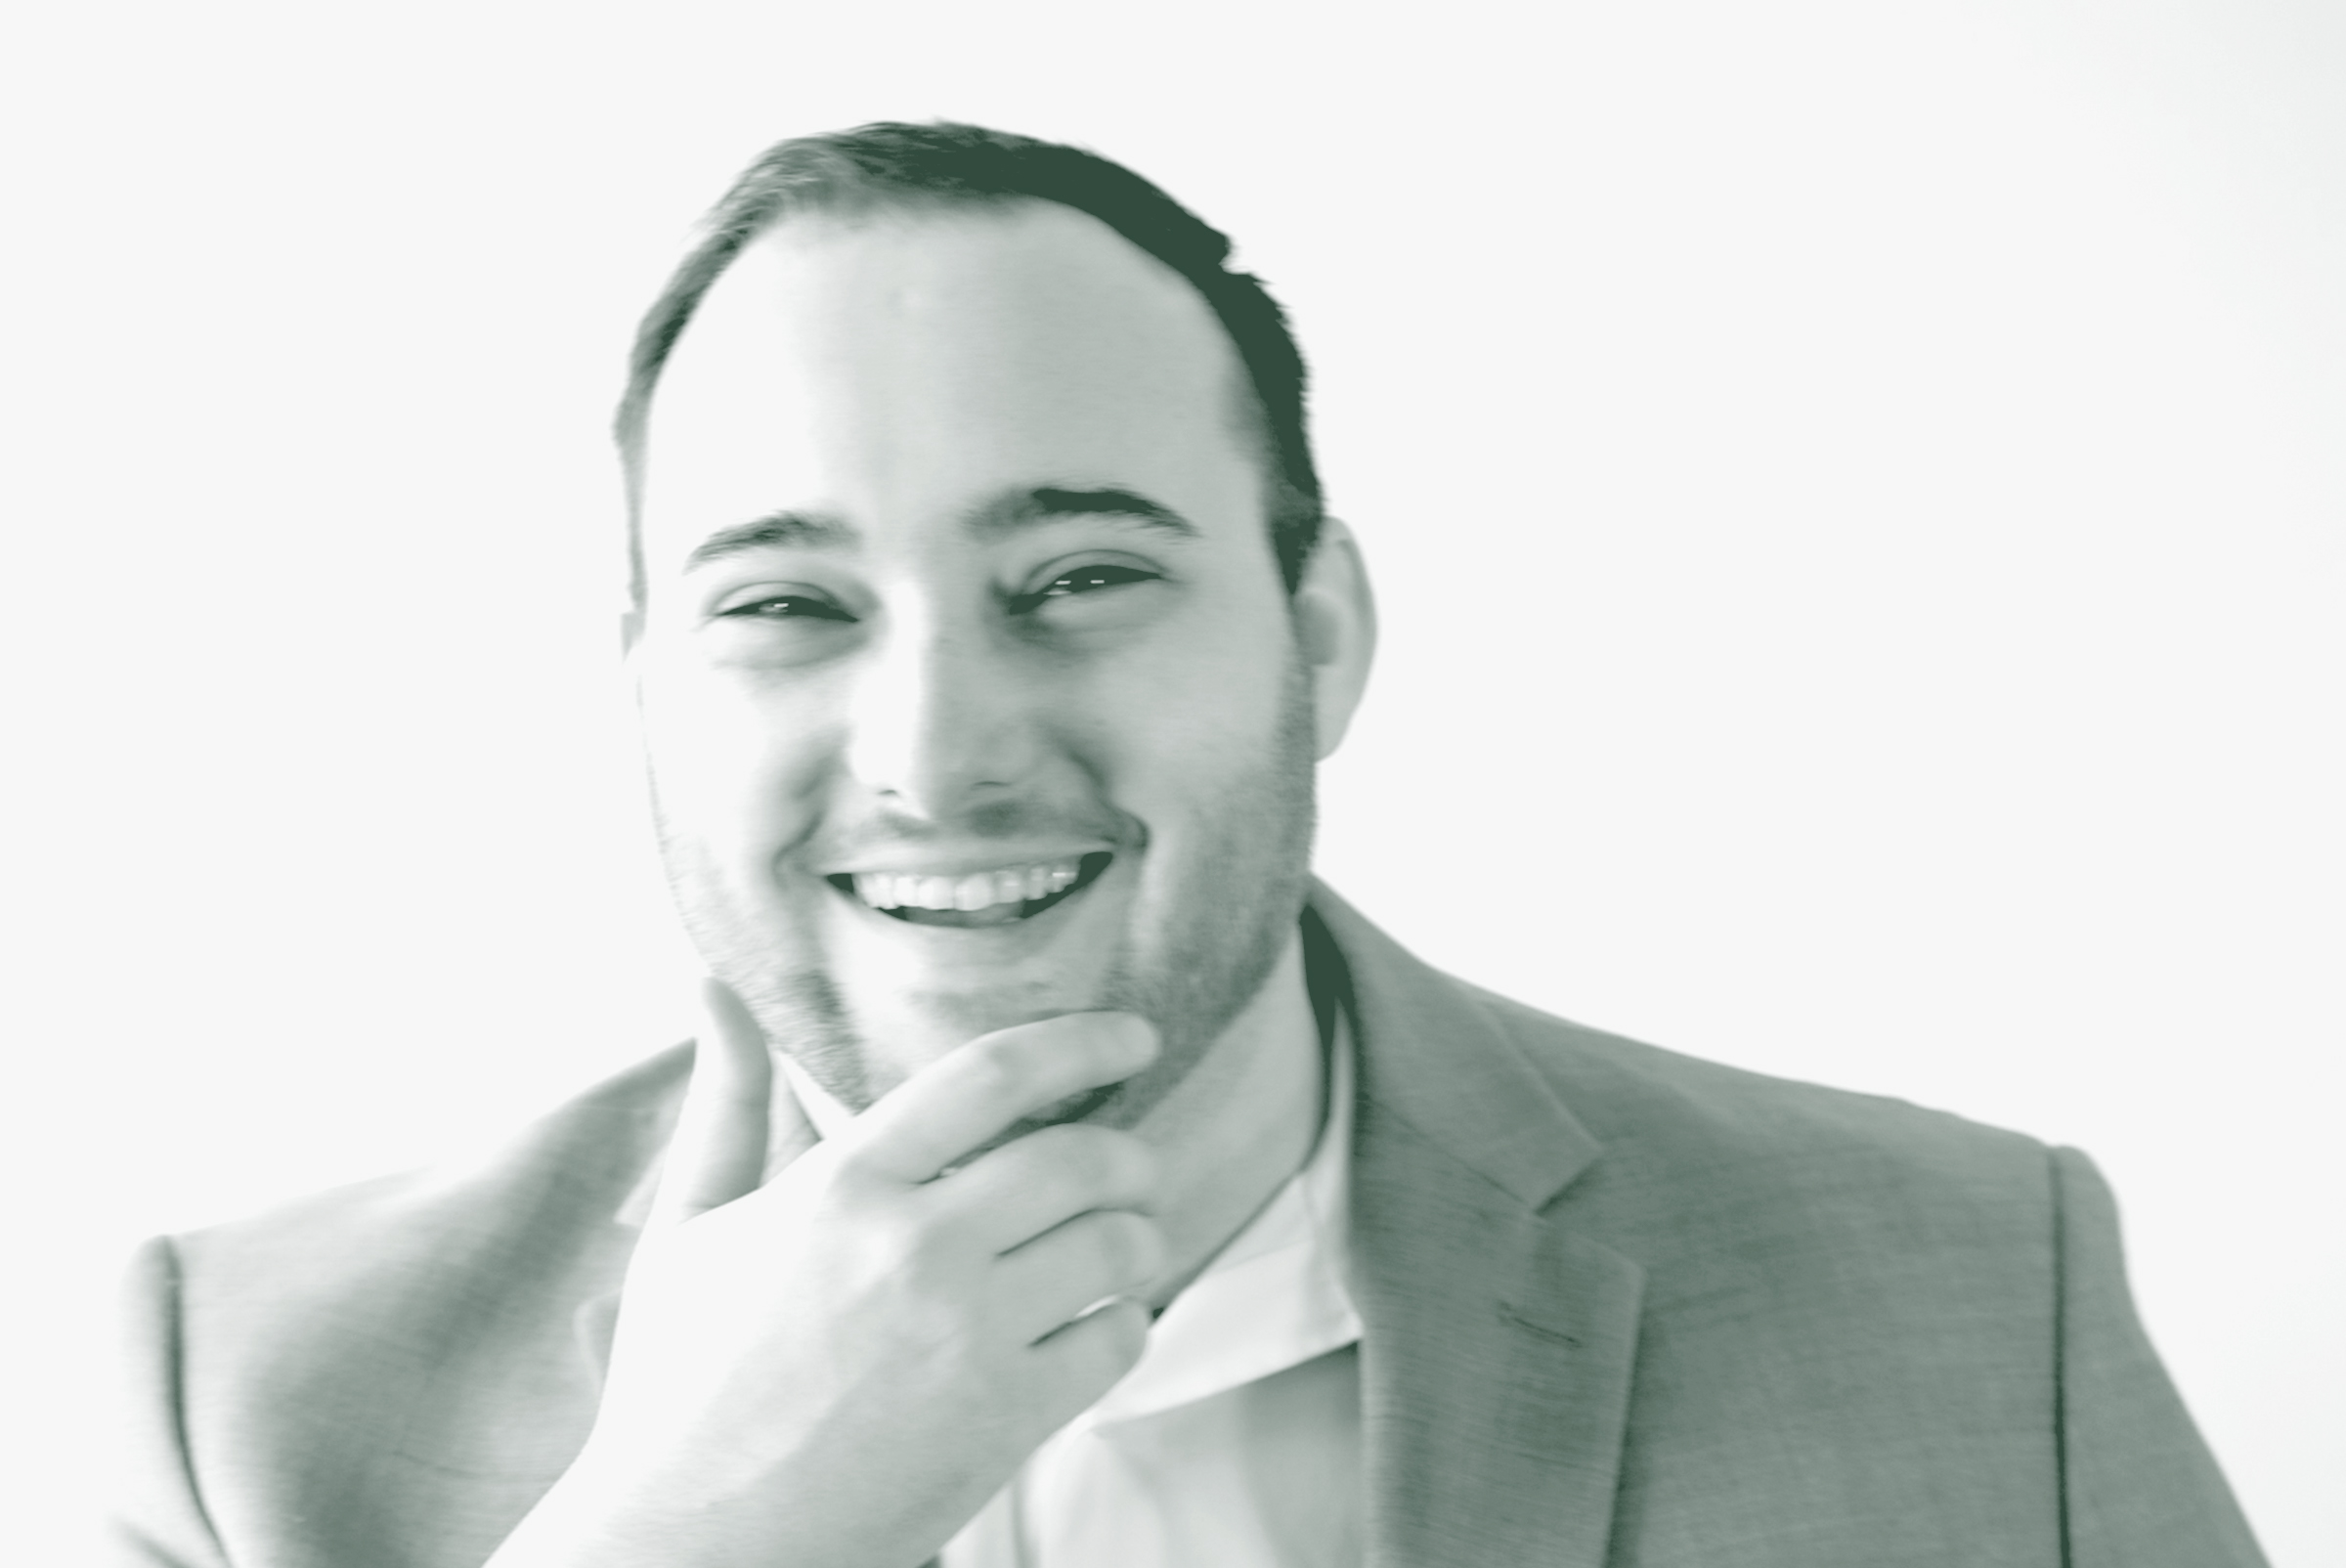 A black and white portrait of Drake Johnson, a Landscape Architecture Leader with GFF in the Landscape Architecture Studio, in front of a white background.